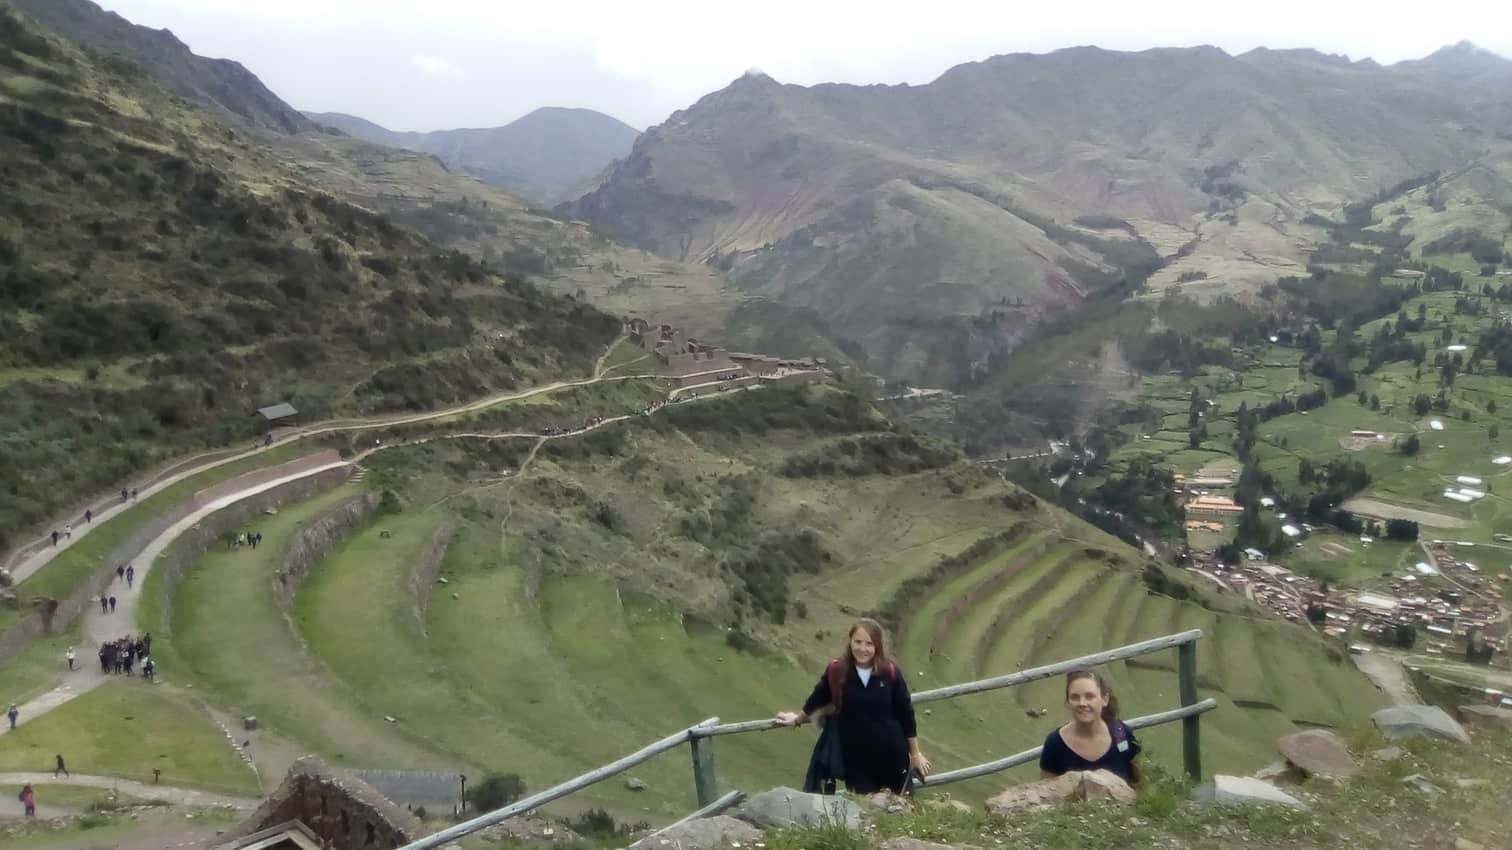 Walking down with my sister in law wasn't that hard as walking up in Pisac, Peru.